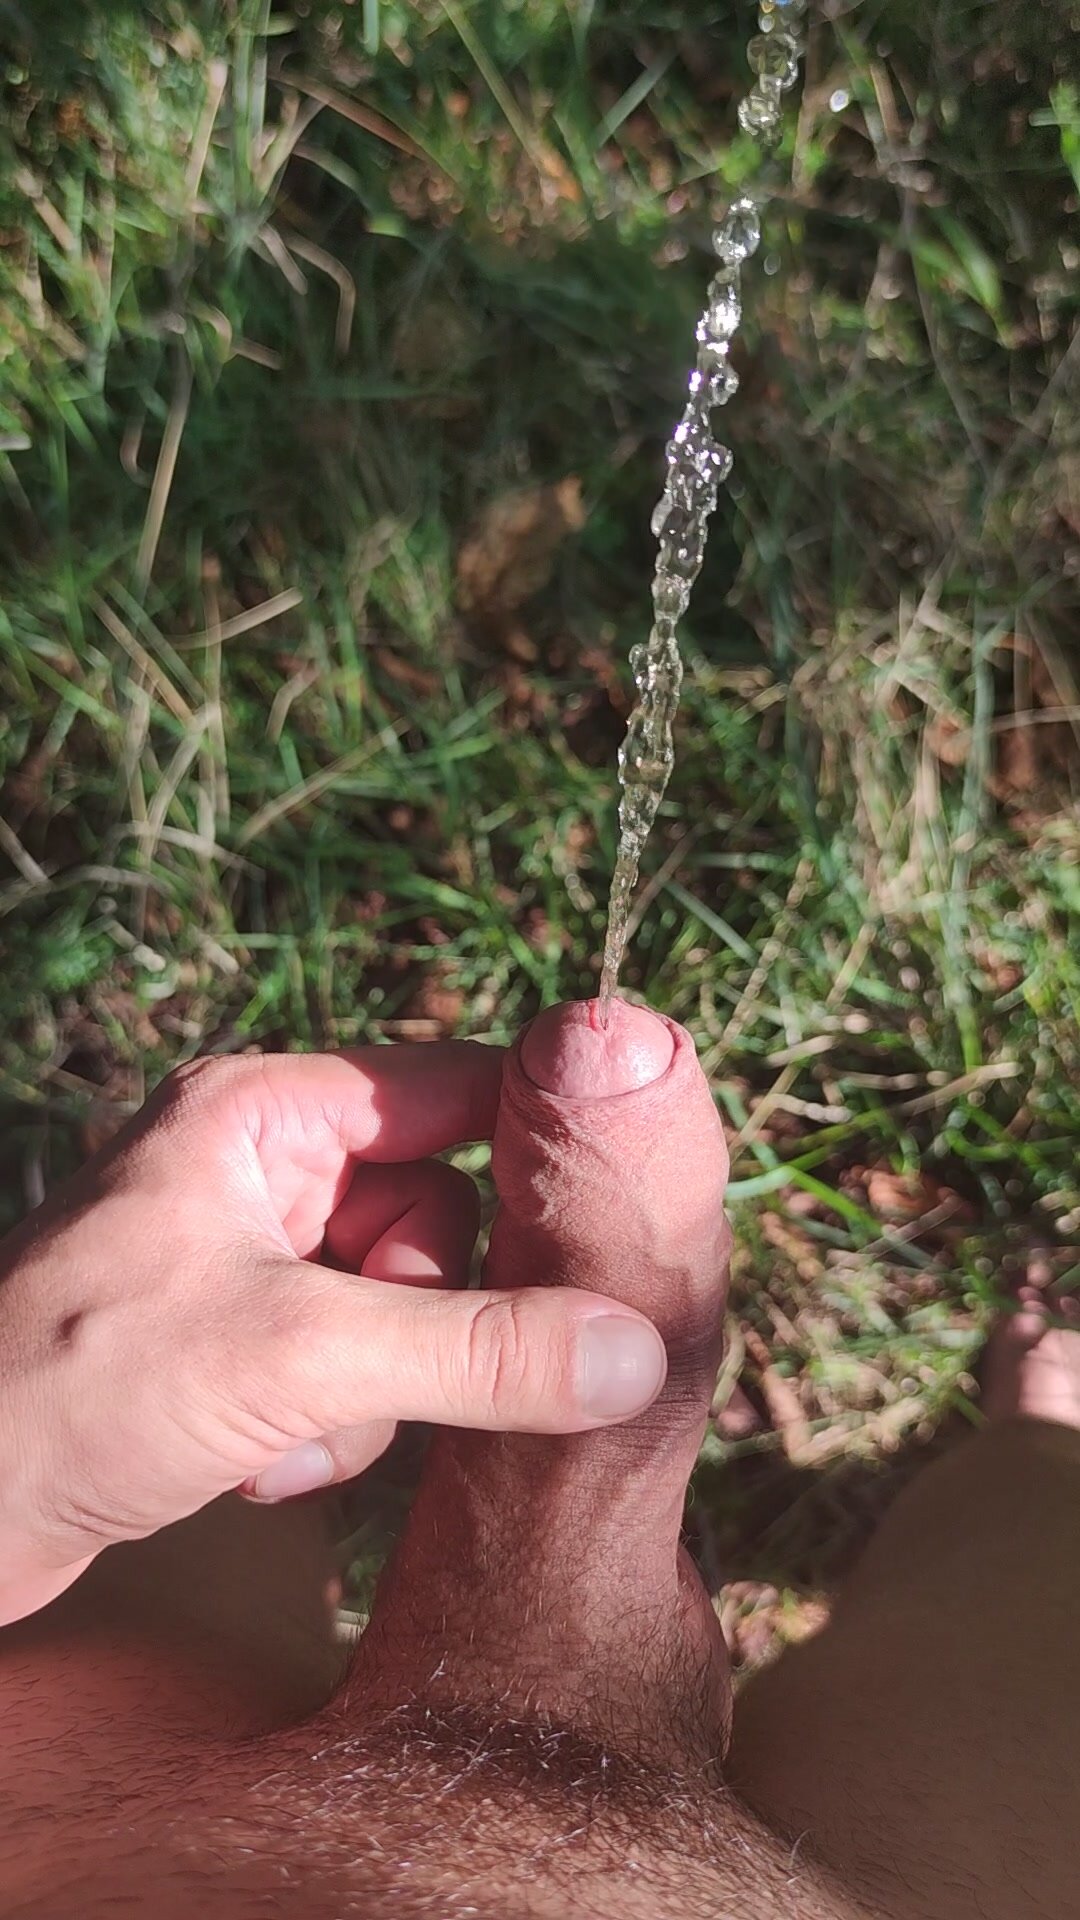 Limp dick pissing in the nature